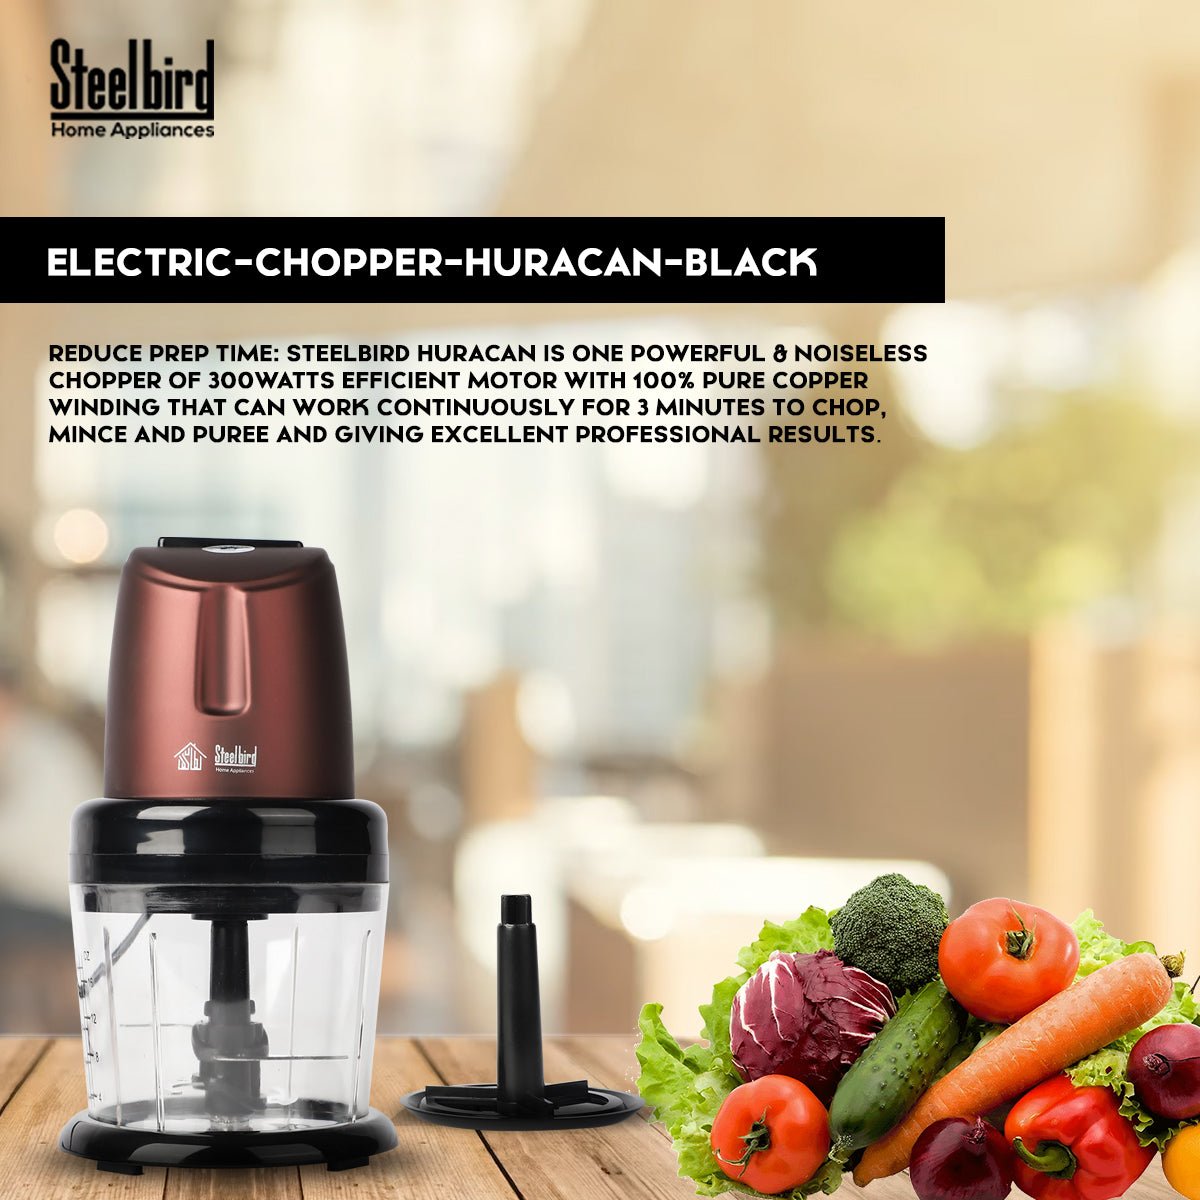 Steelbird Huracan - 300 Watts Electric Chopper with Copper Motor, Chop, Mince, Puree, Whisk, 800 ml Capacity, One Touch Operation (Maroon)